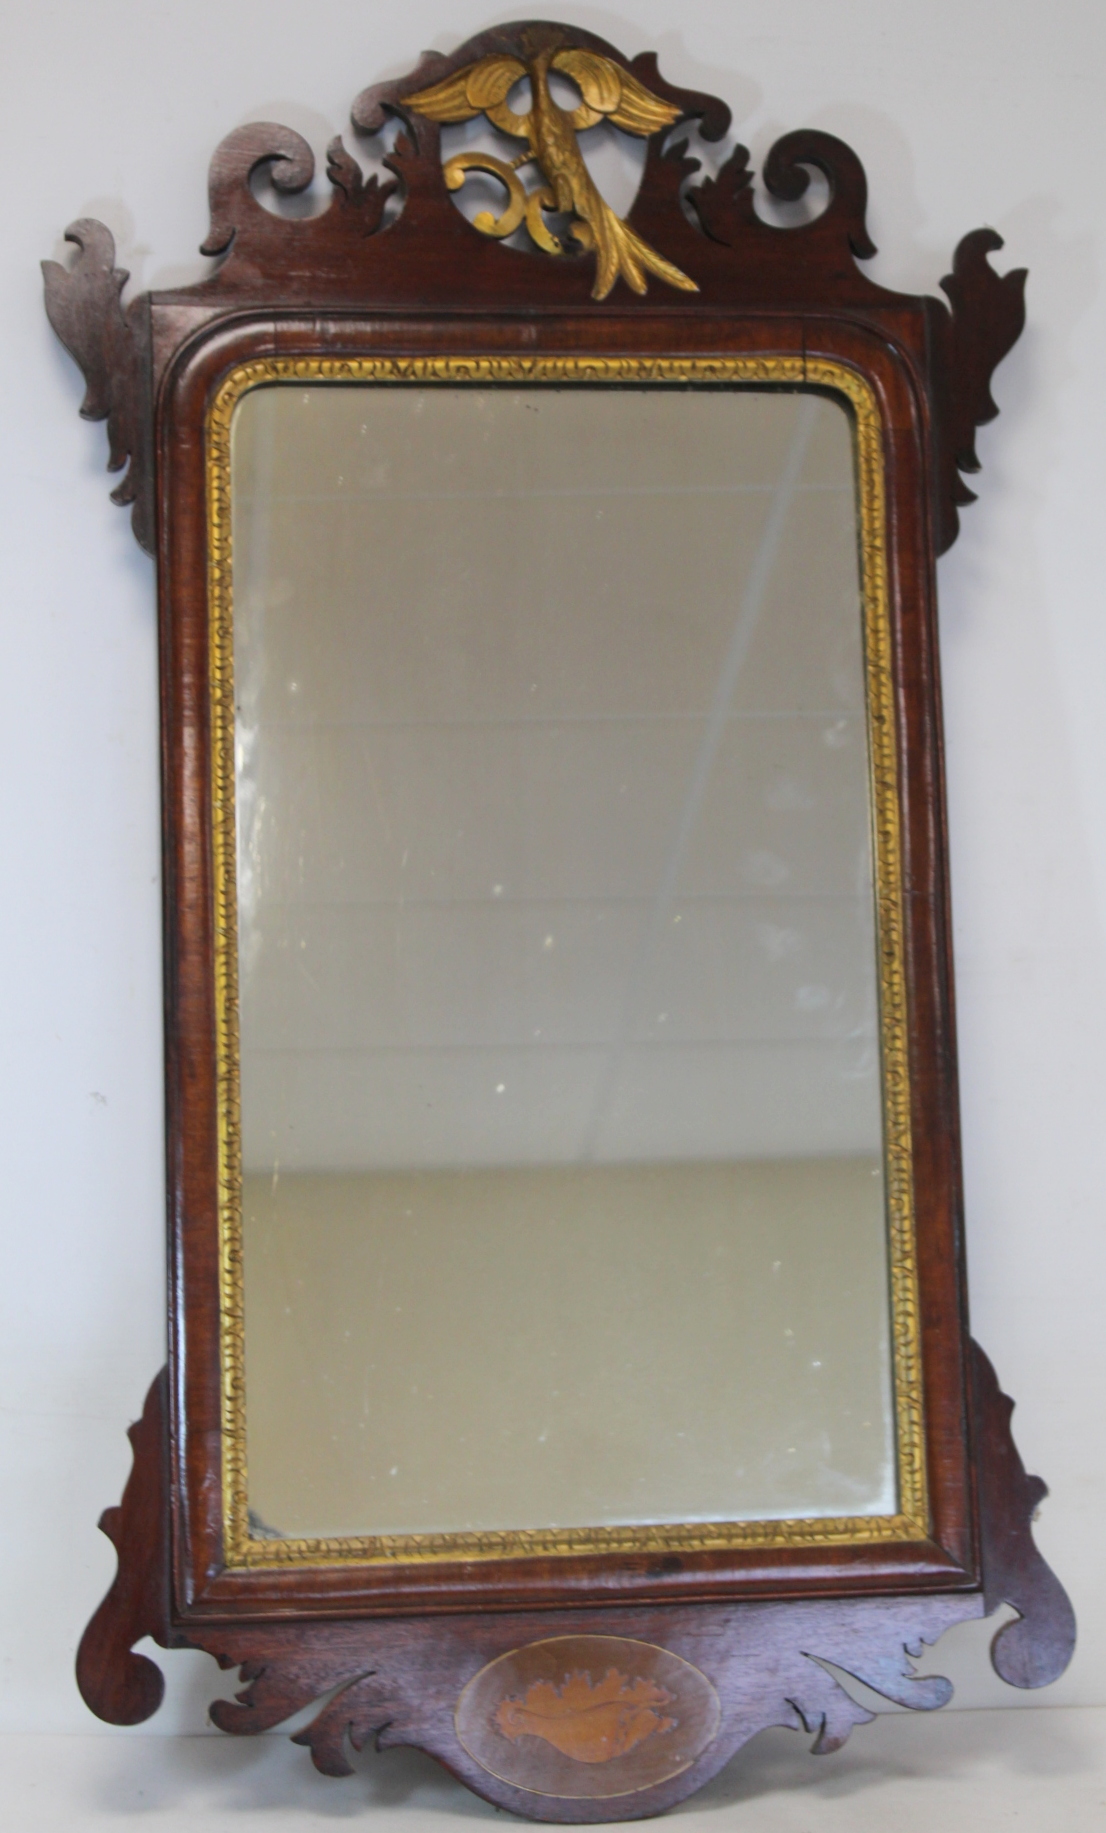 George III style mahogany wall mirror with fret cut frame, gilt slip and bird pediment and inlaid